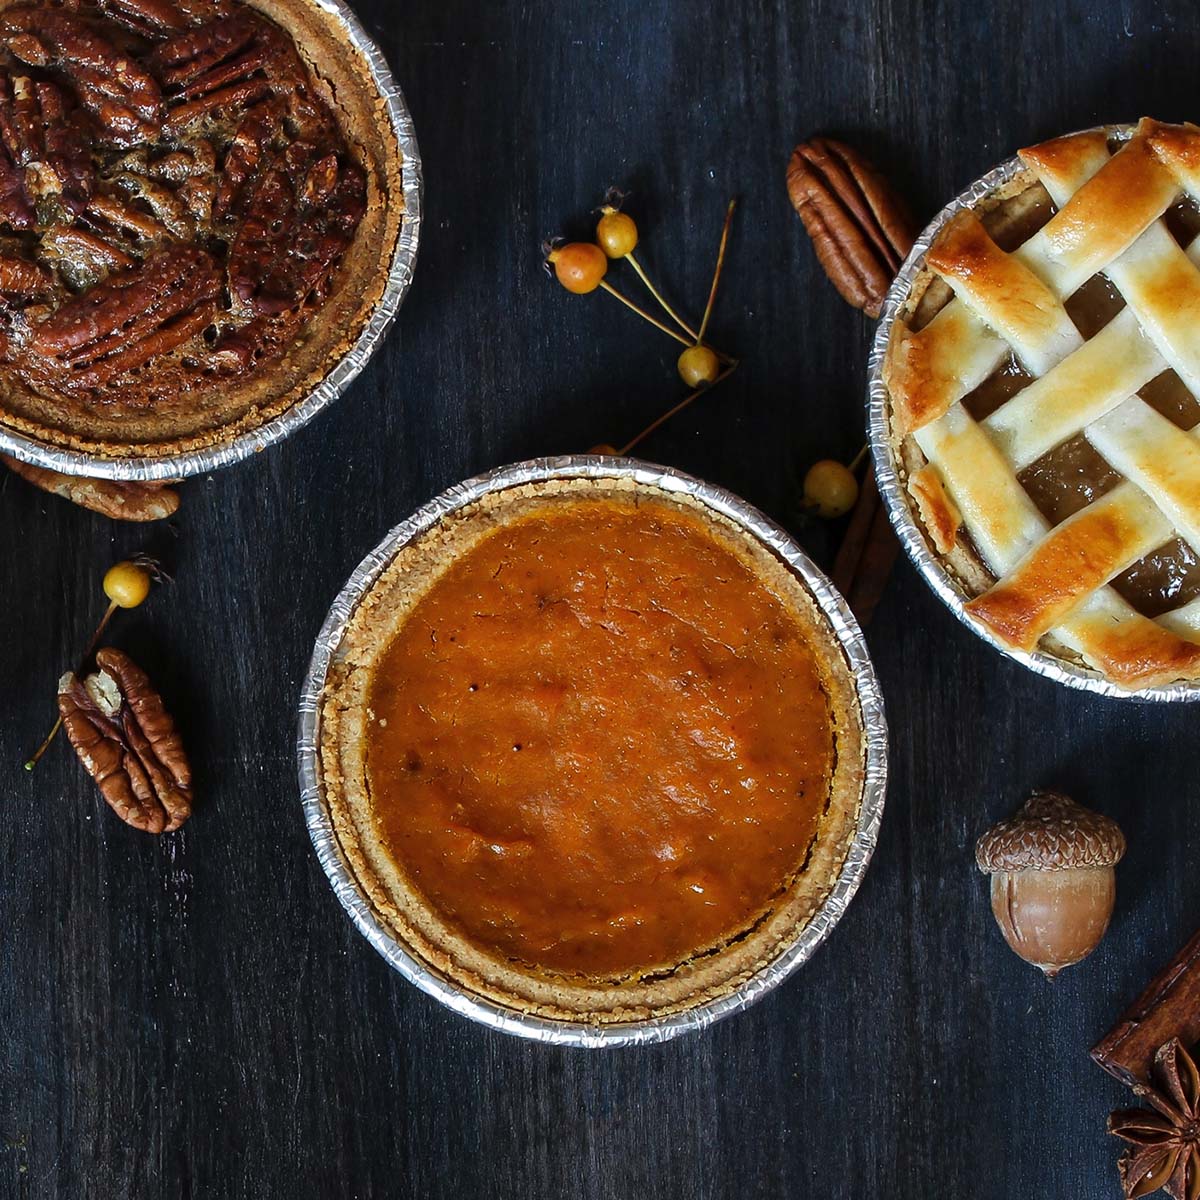 Gobble Up These Holiday Pies!